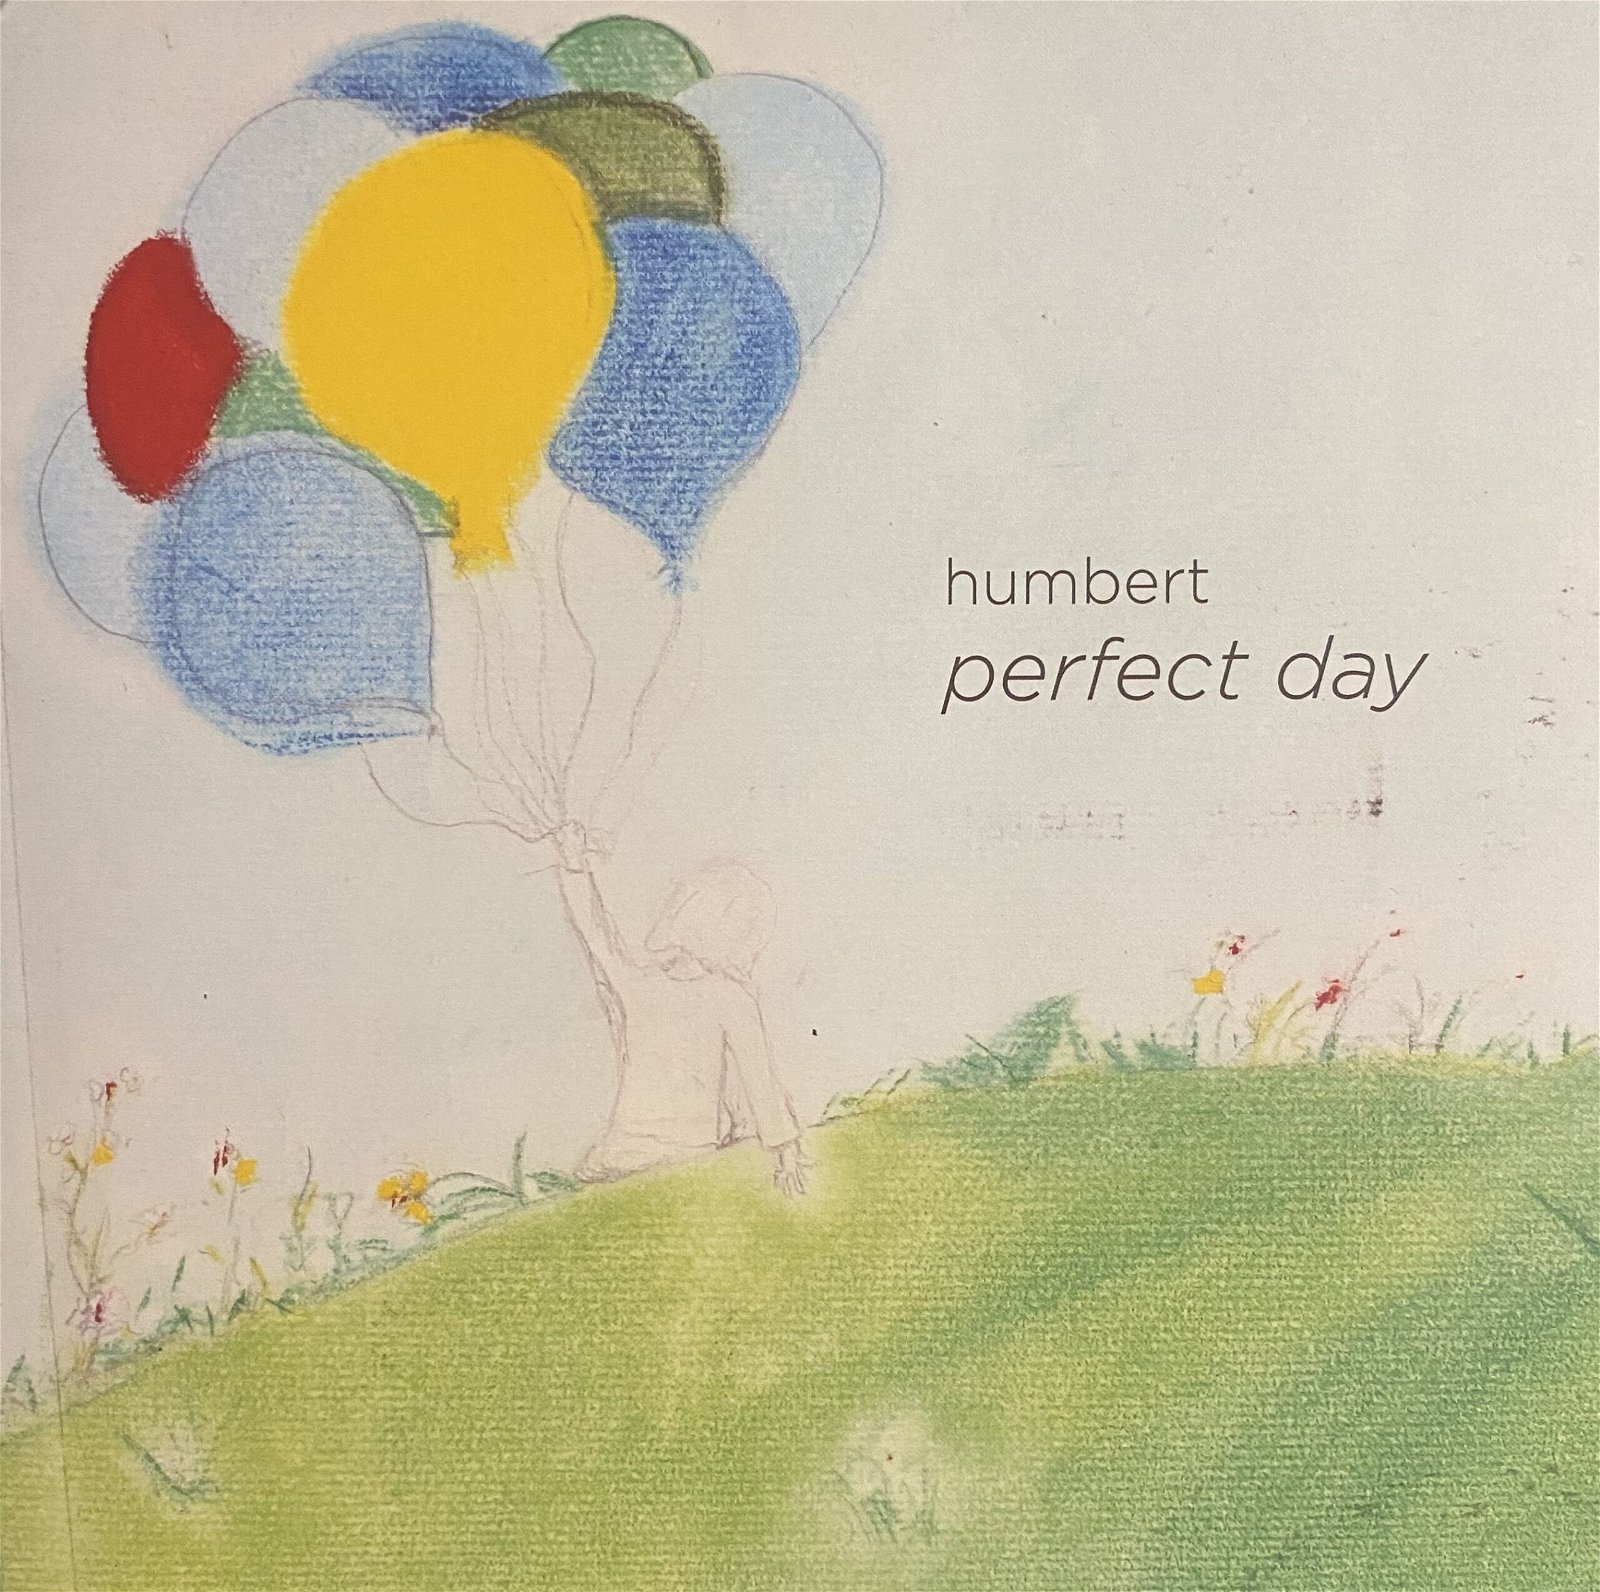 Humbert's "Perfect Day" Was a Labor of Love